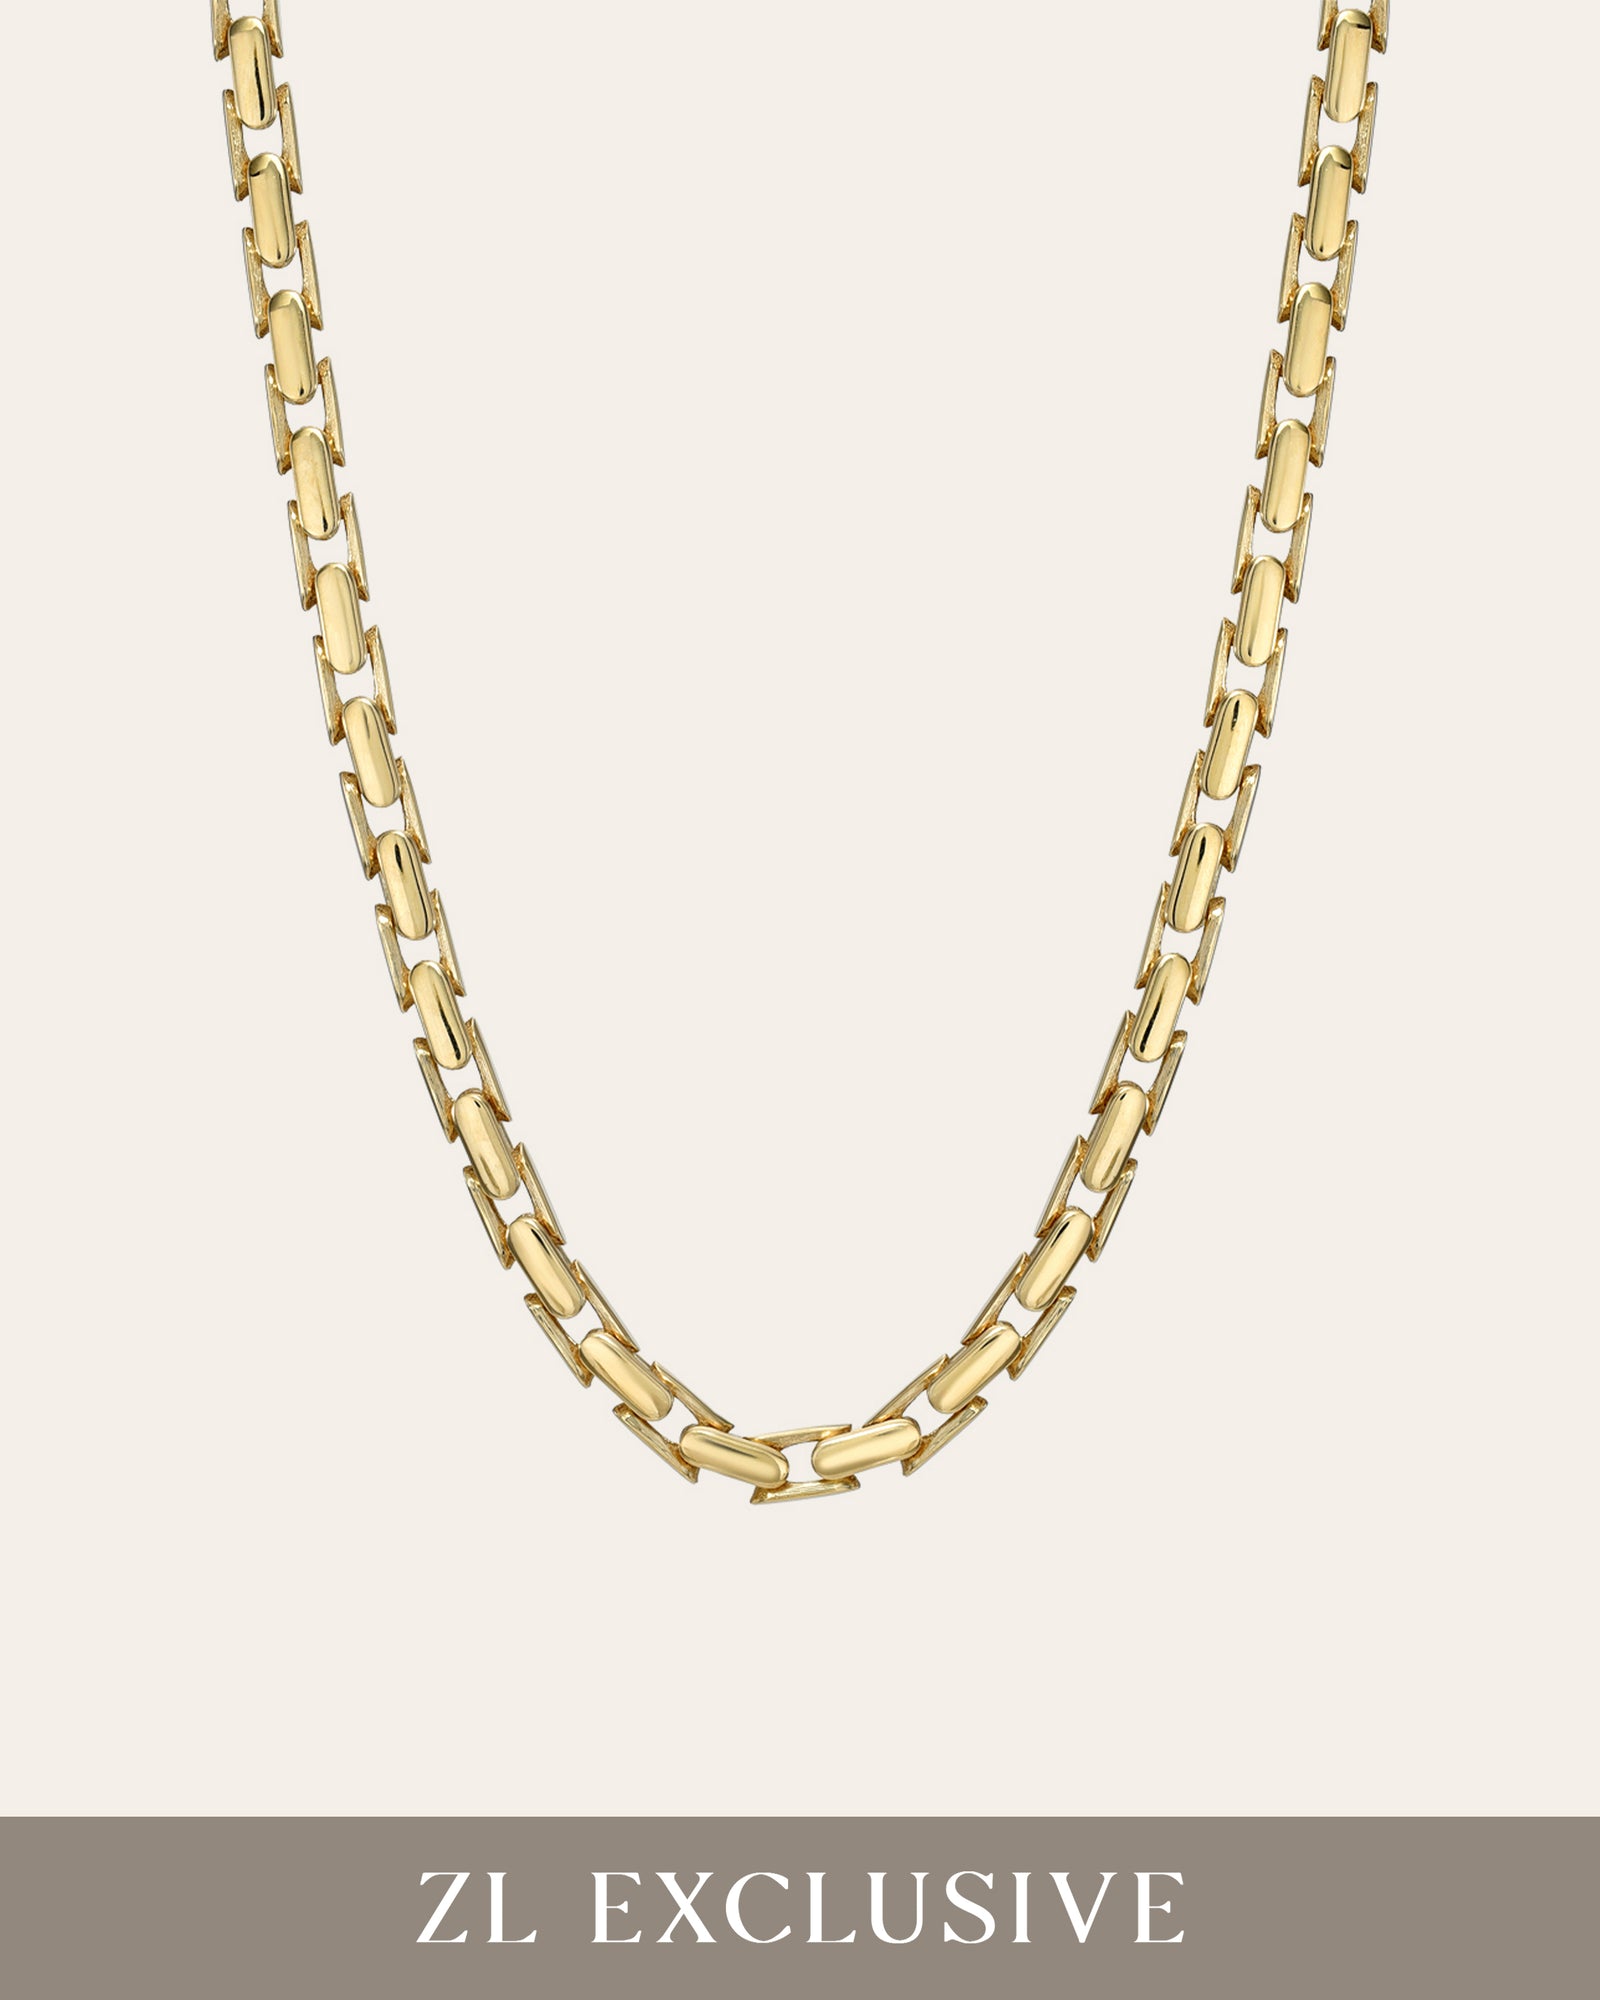 14k Gold Large Paper Clip Chain Necklace - Zoe Lev Jewelry